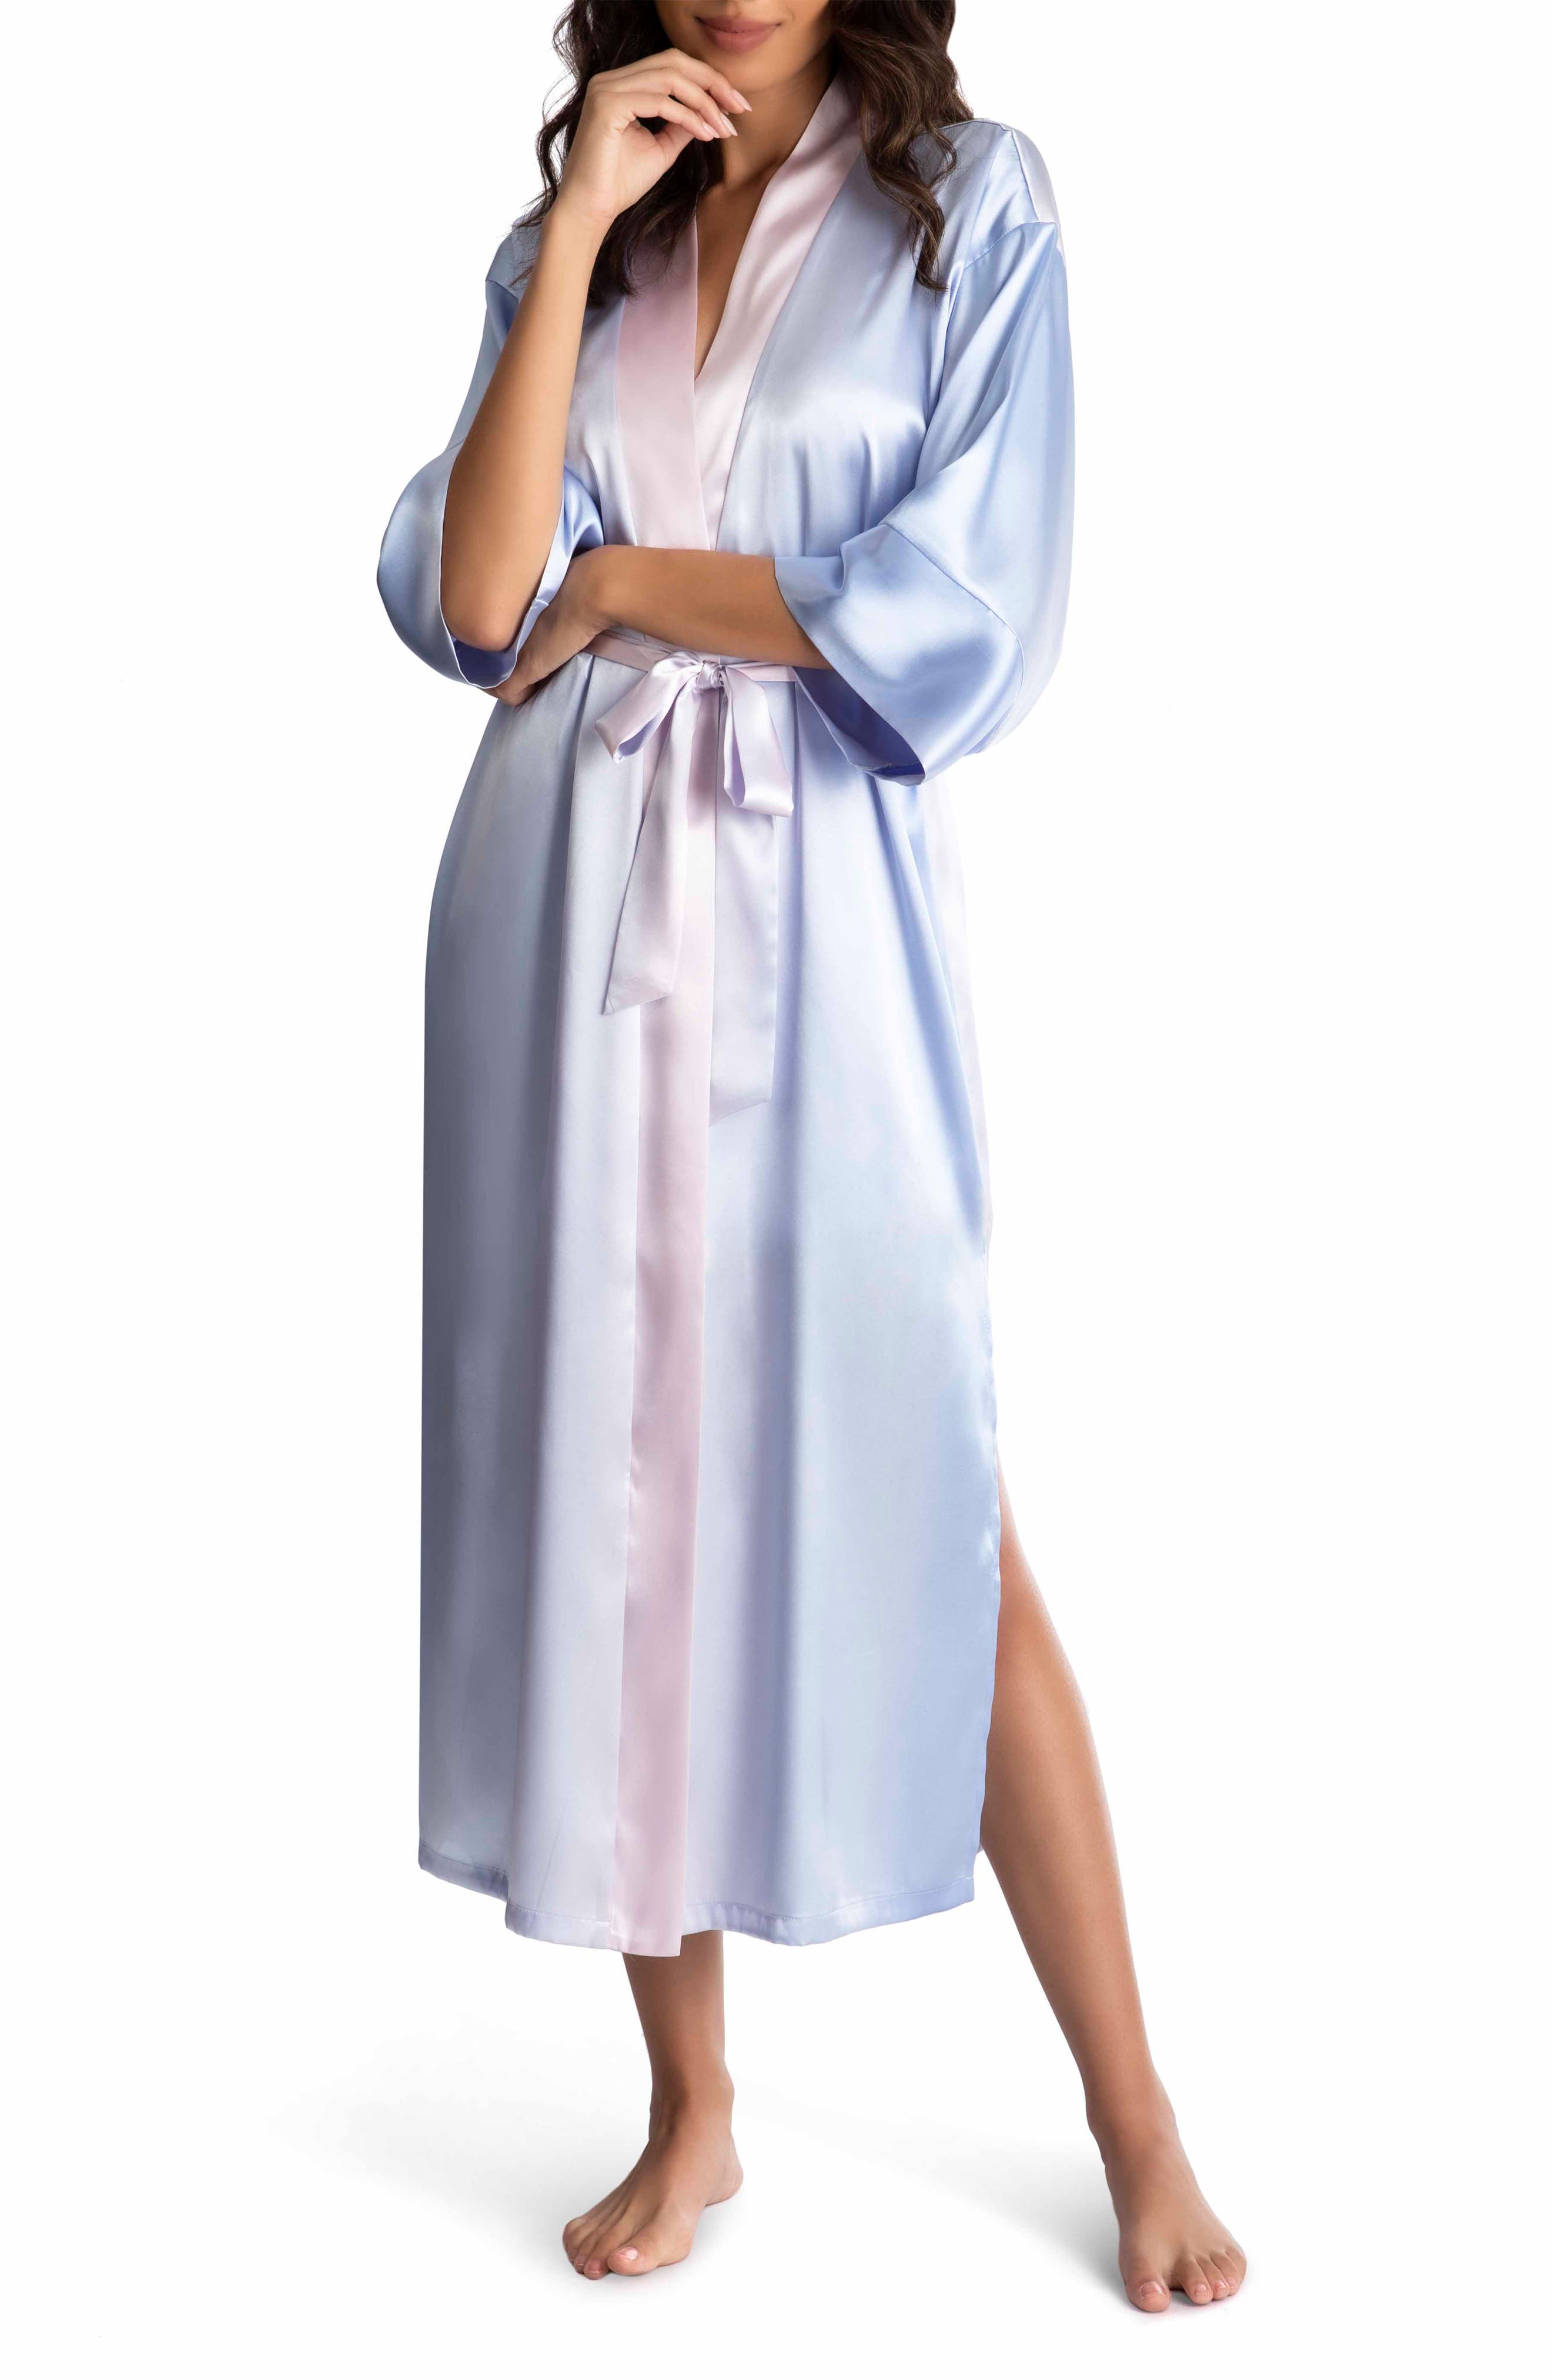 Ladies satin long Nightgown robe wrap lace detail 10 to plus 22 many colours